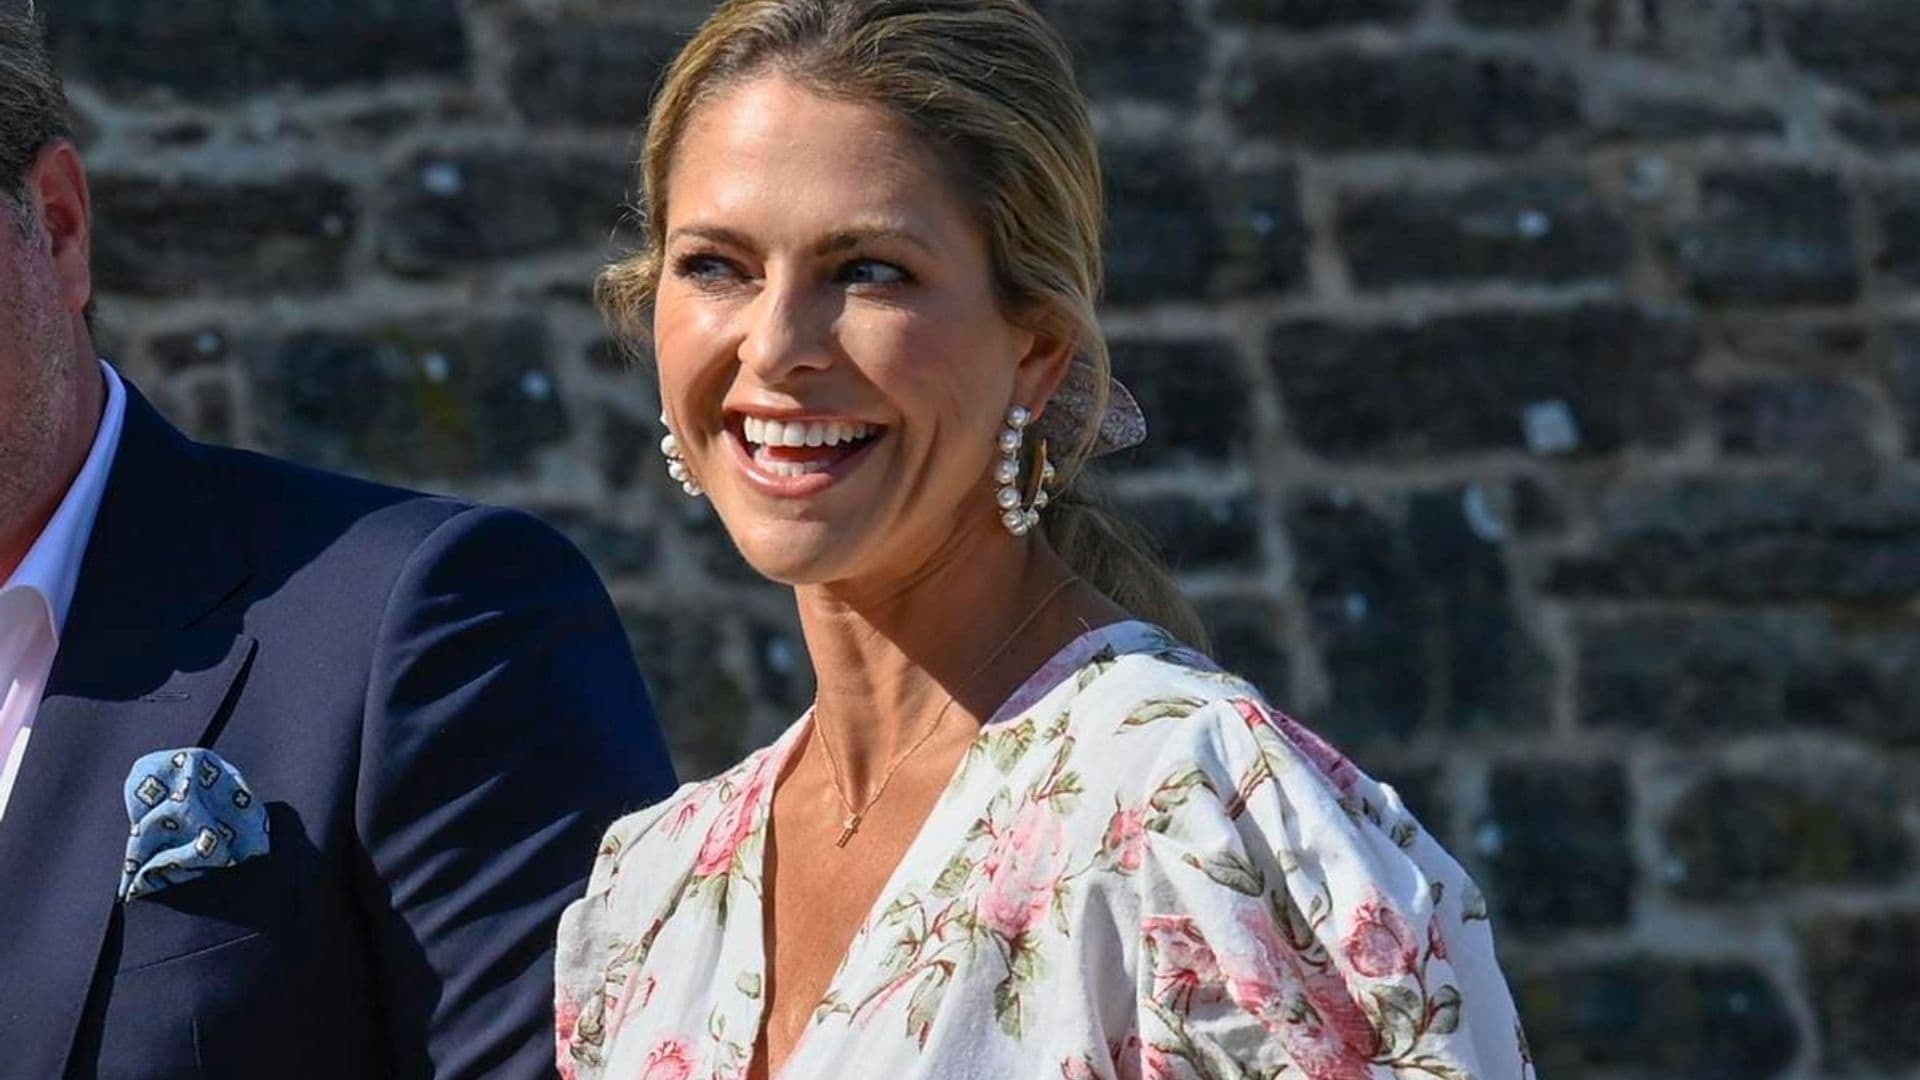 Princess Madeleine shares new photo with her daughters Leonore and Adrienne